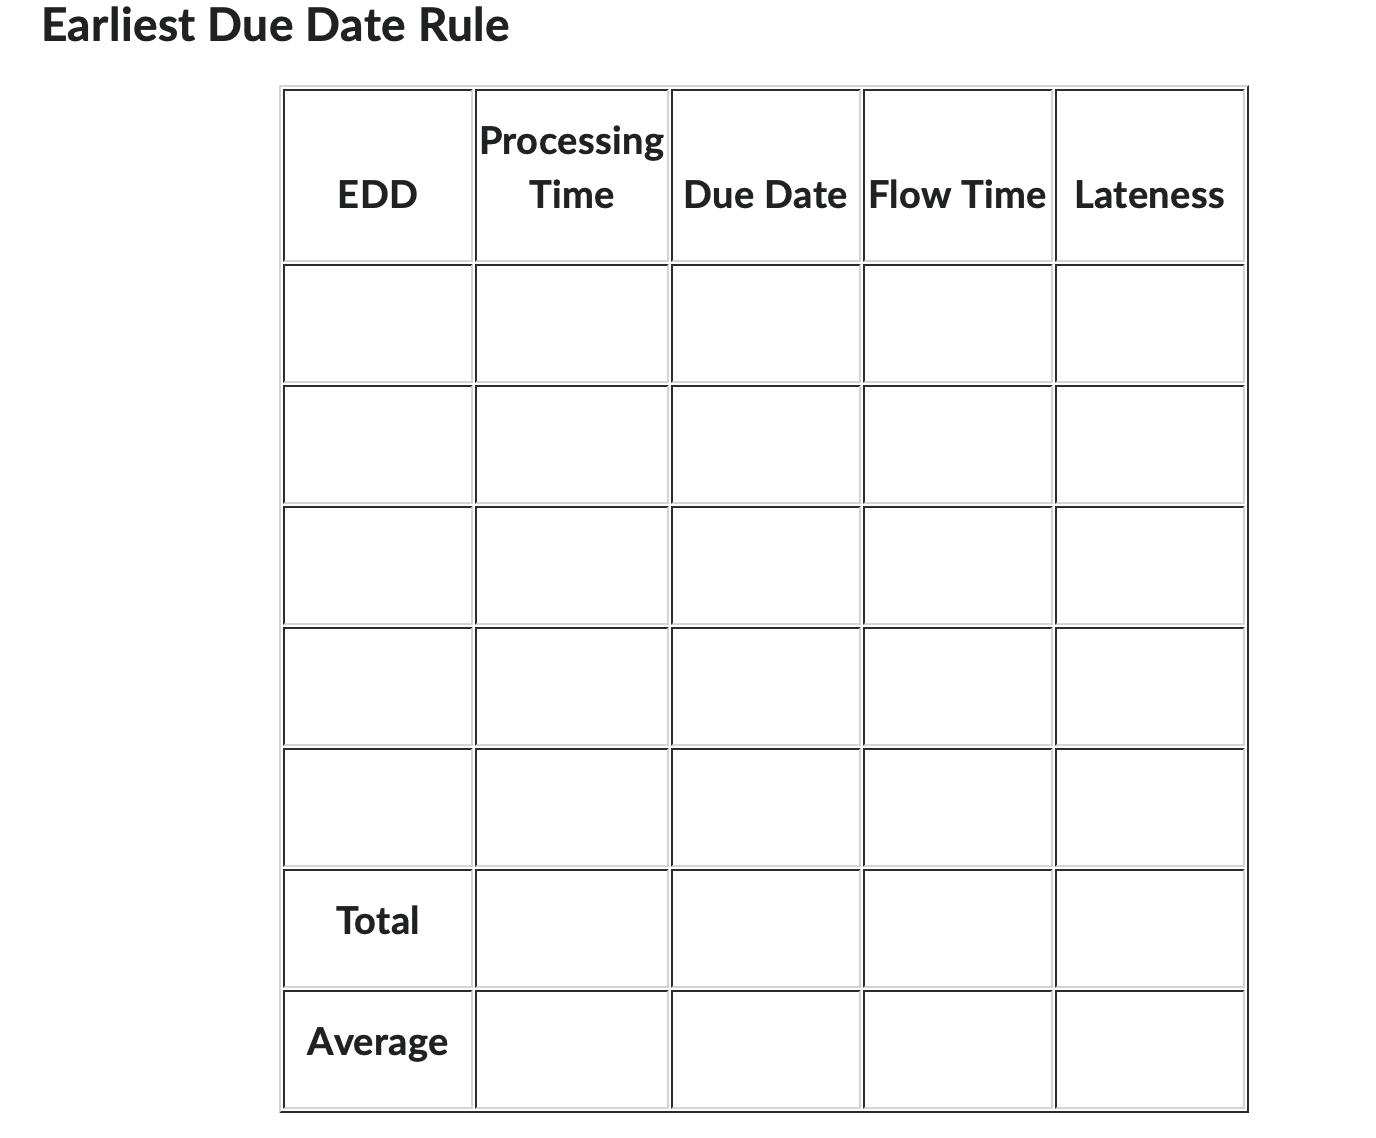 Earliest Due Date Rule EDD Total Average Processing Time Due Date Flow Time Lateness